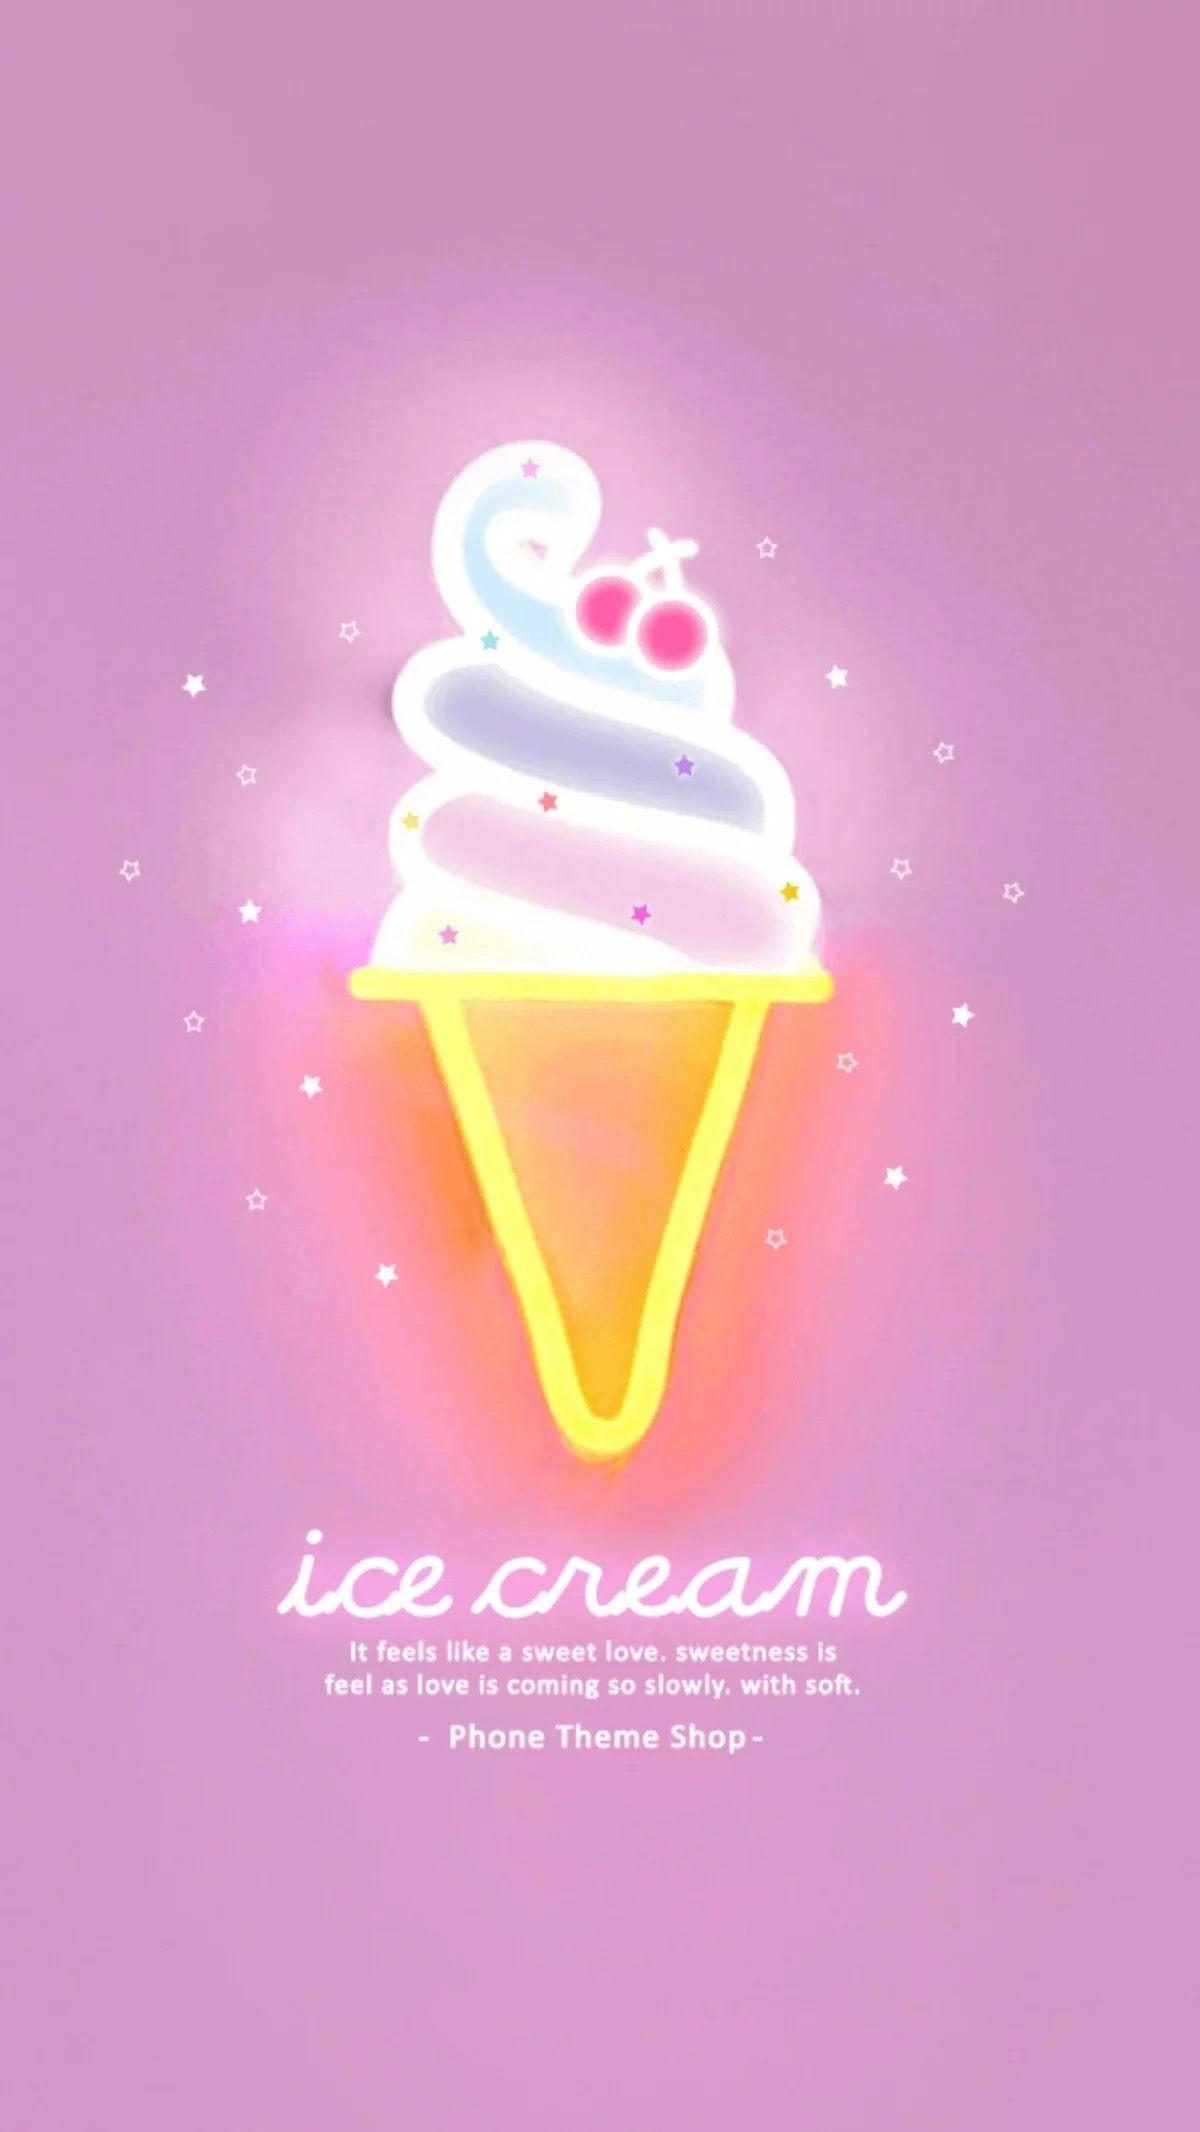 A poster of an ice cream cone with neon colors - Ice cream